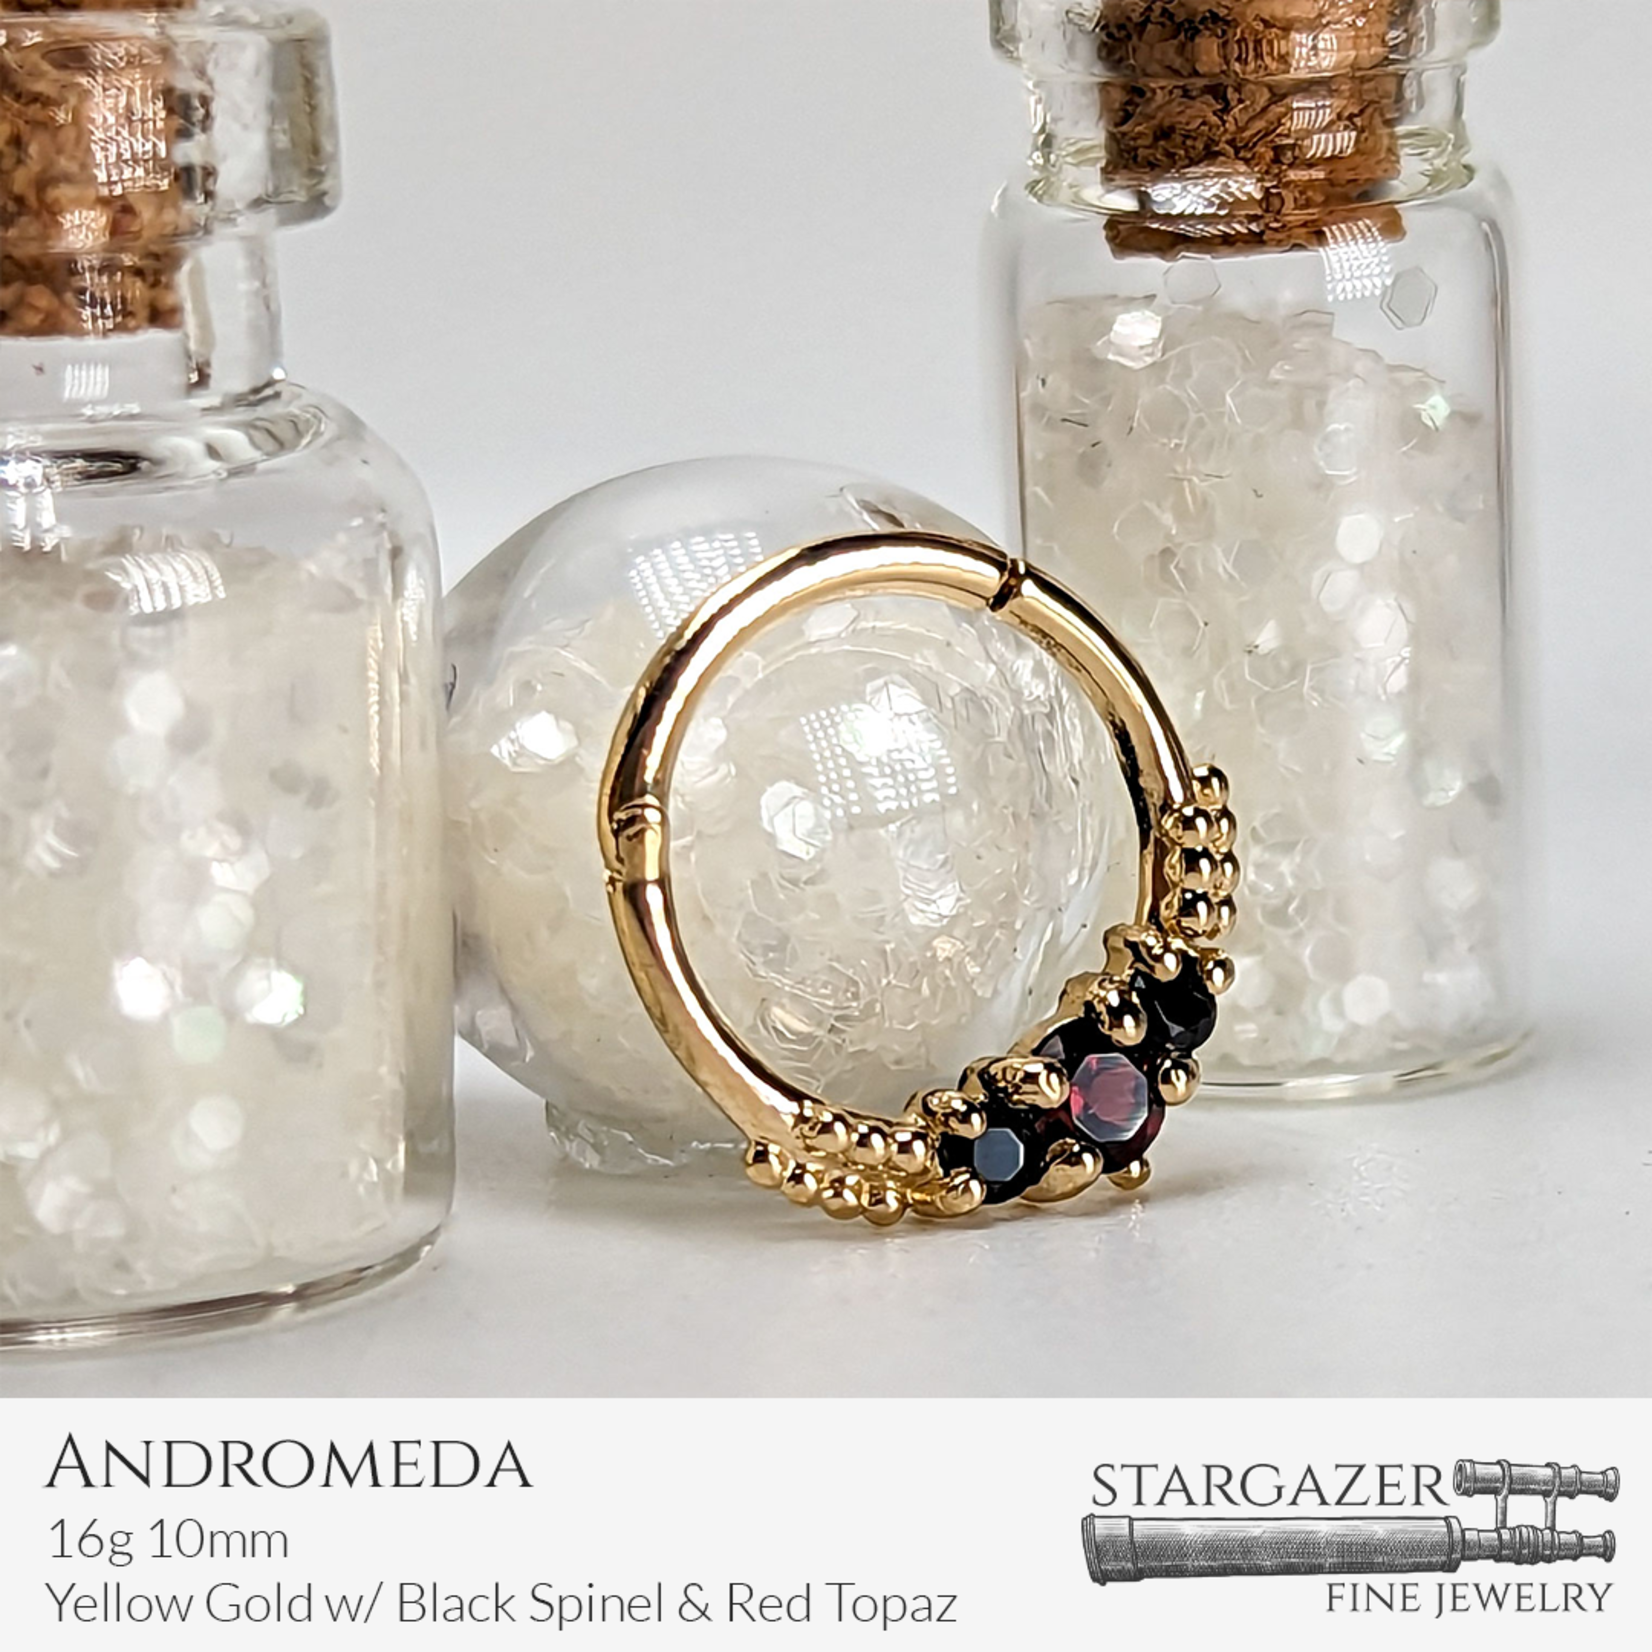 Andromeda 16g 10mm; Yellow Gold with Black Spinel and Blazing Red Topaz